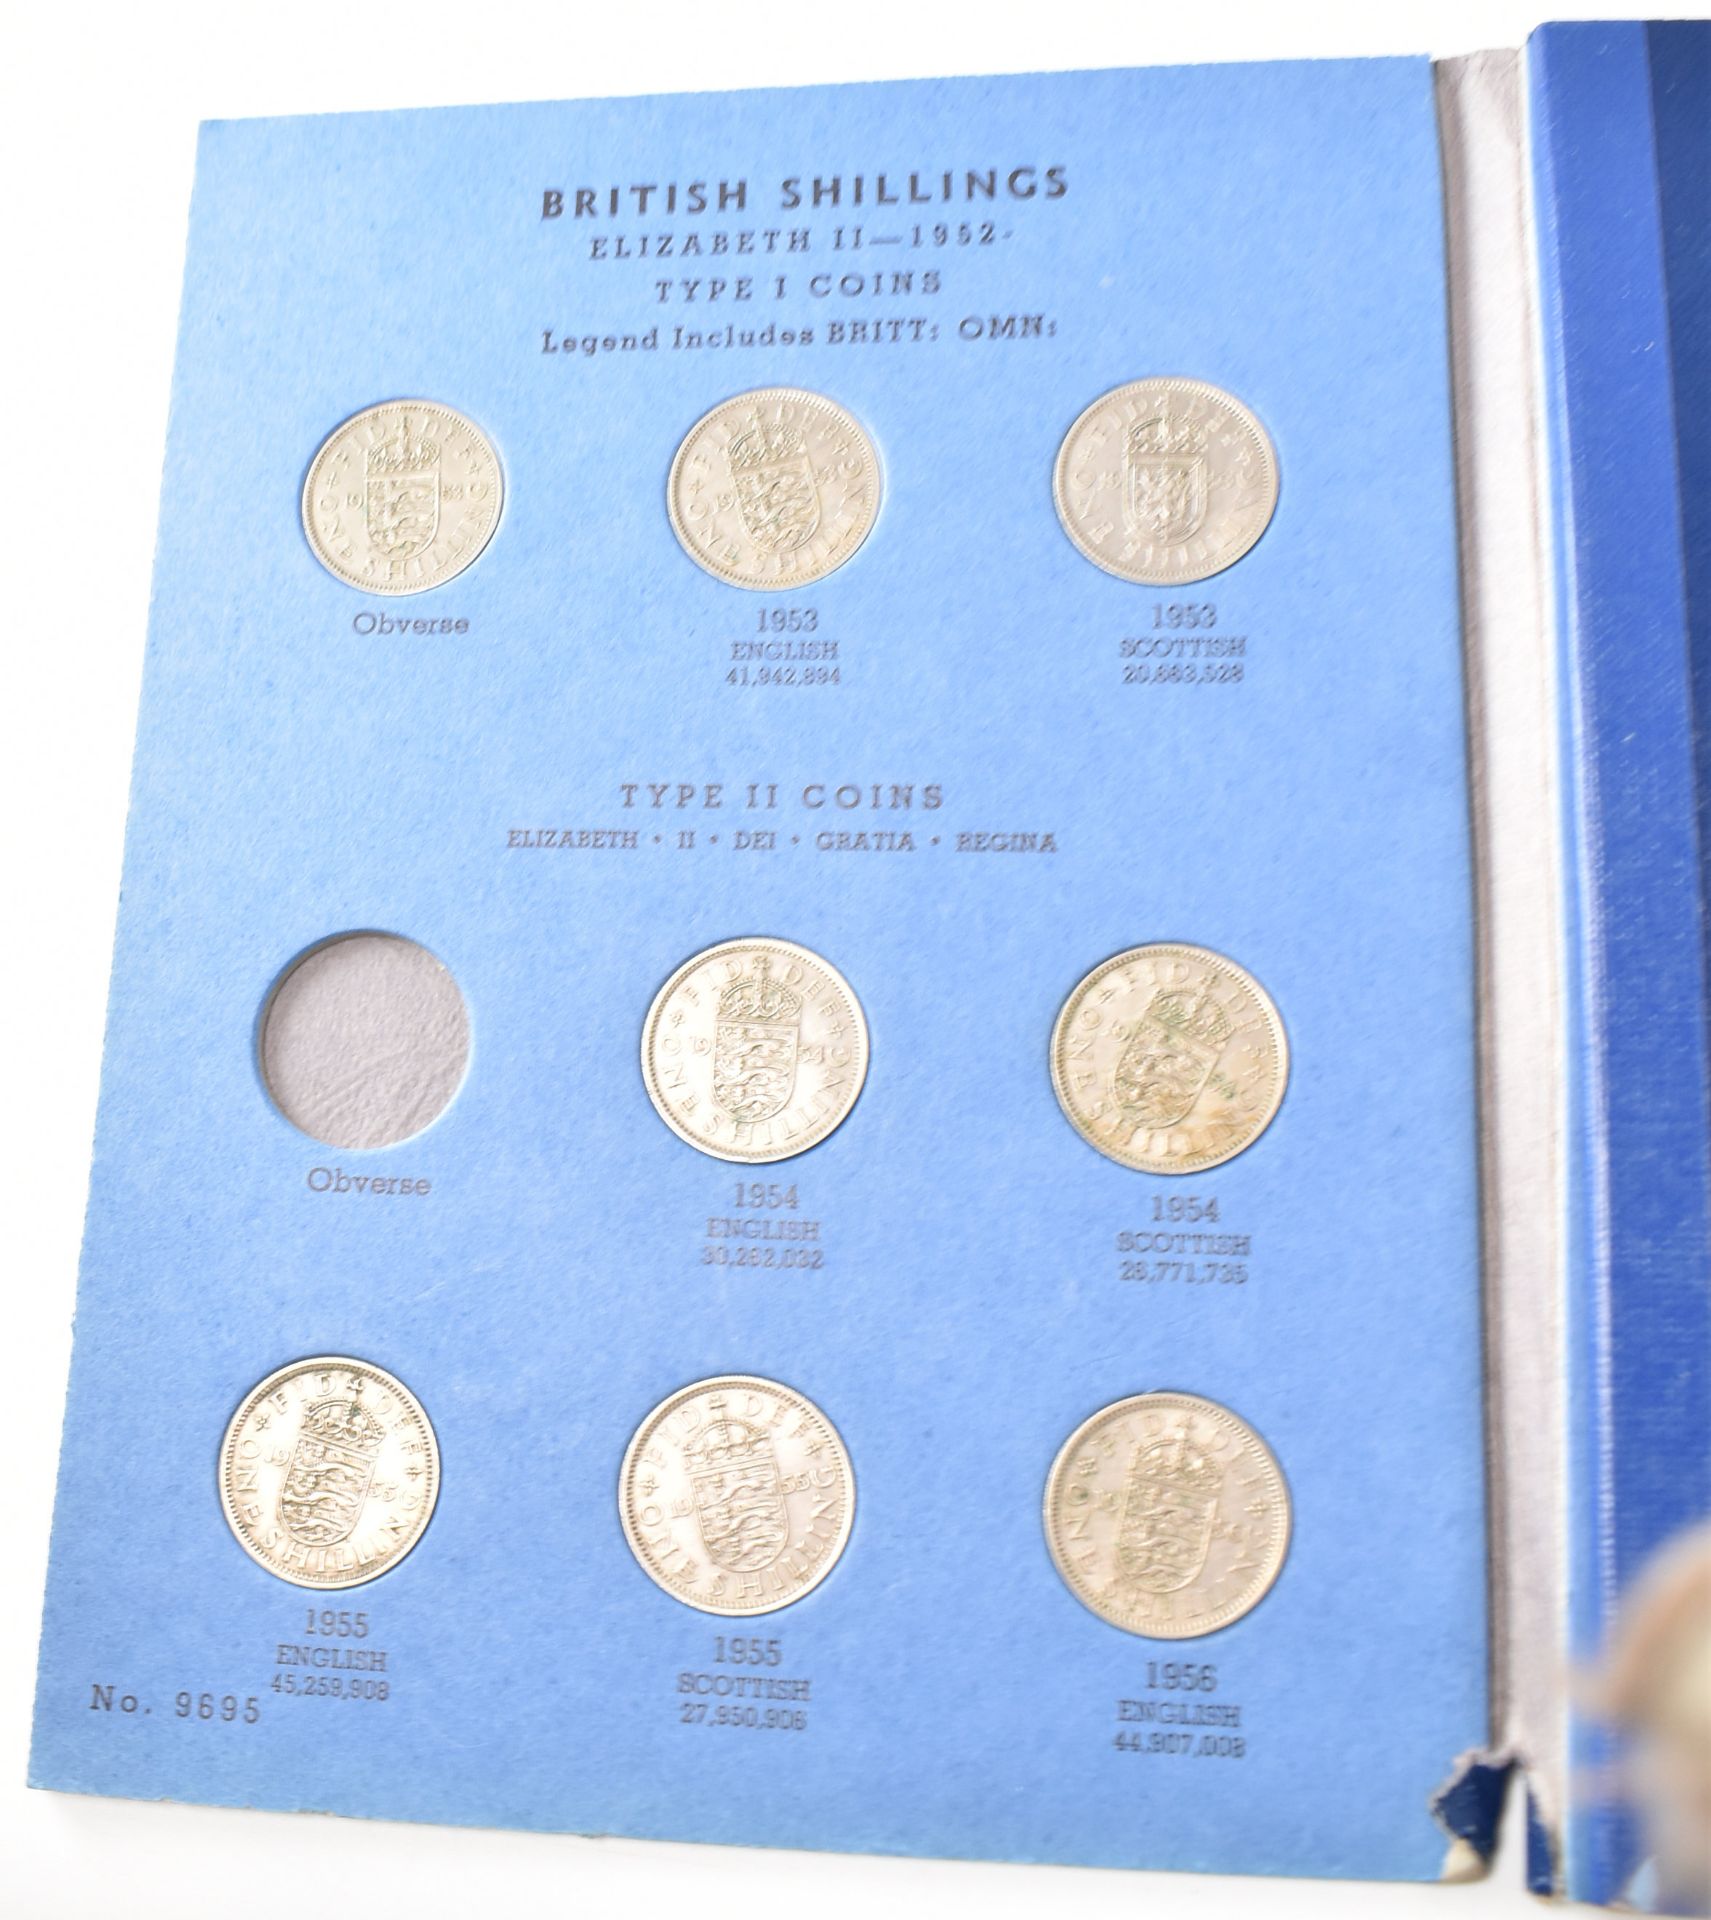 LARGE COLLECTION OF 20TH CENTURY GREAT BRITAIN COINS FOLDERS - Image 5 of 5